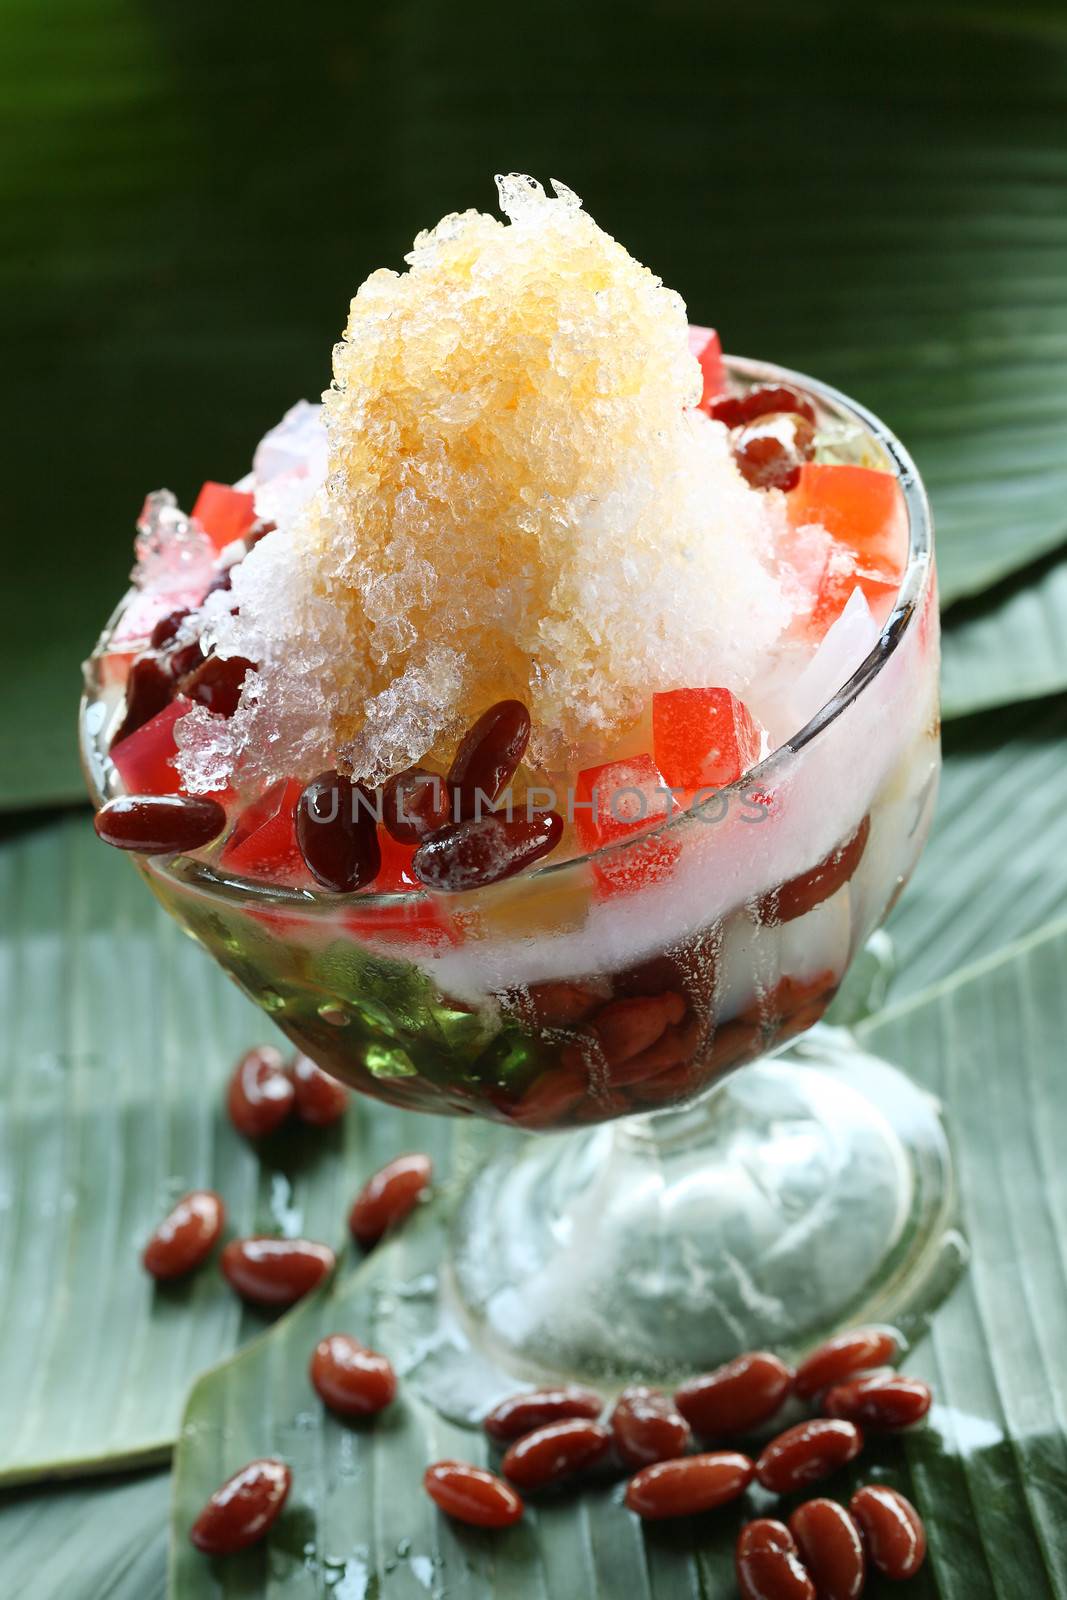 Es campur (Indonesian for "mixed ice") is Indonesian cold beverages often served as dessert